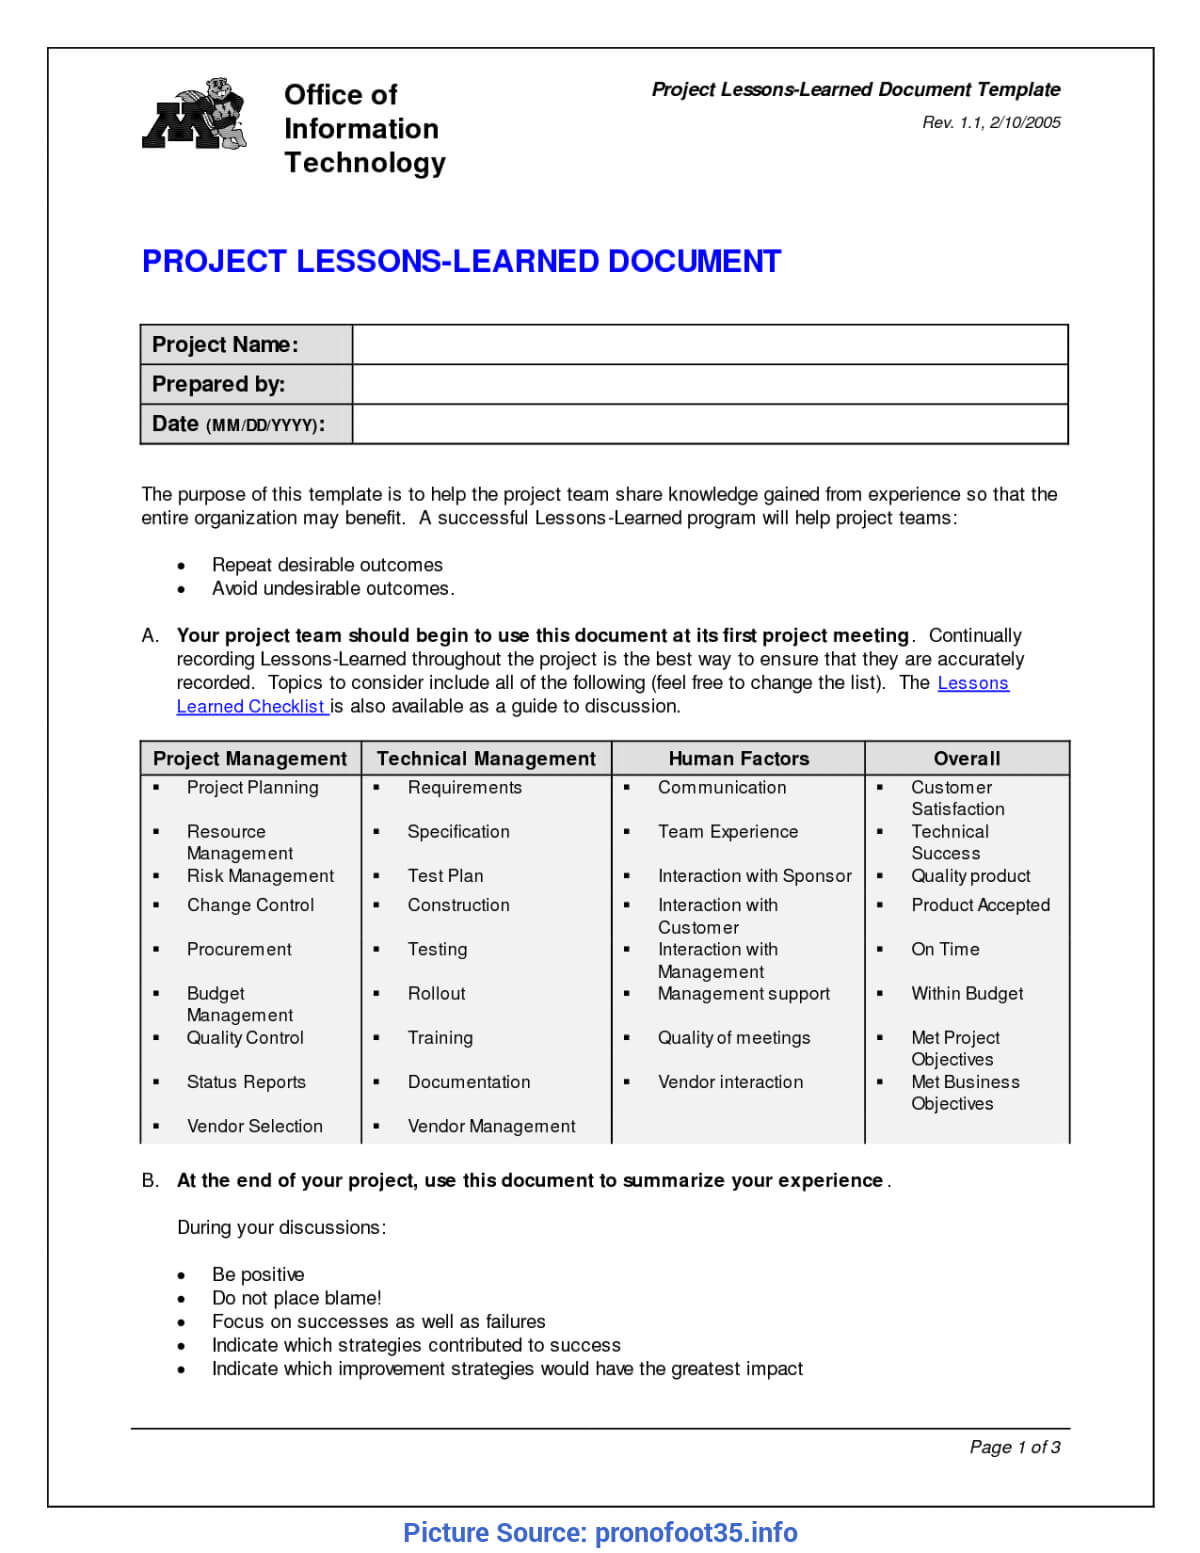 Fresh Project Management Lessons Learned Report Lessons With Lessons Learnt Report Template